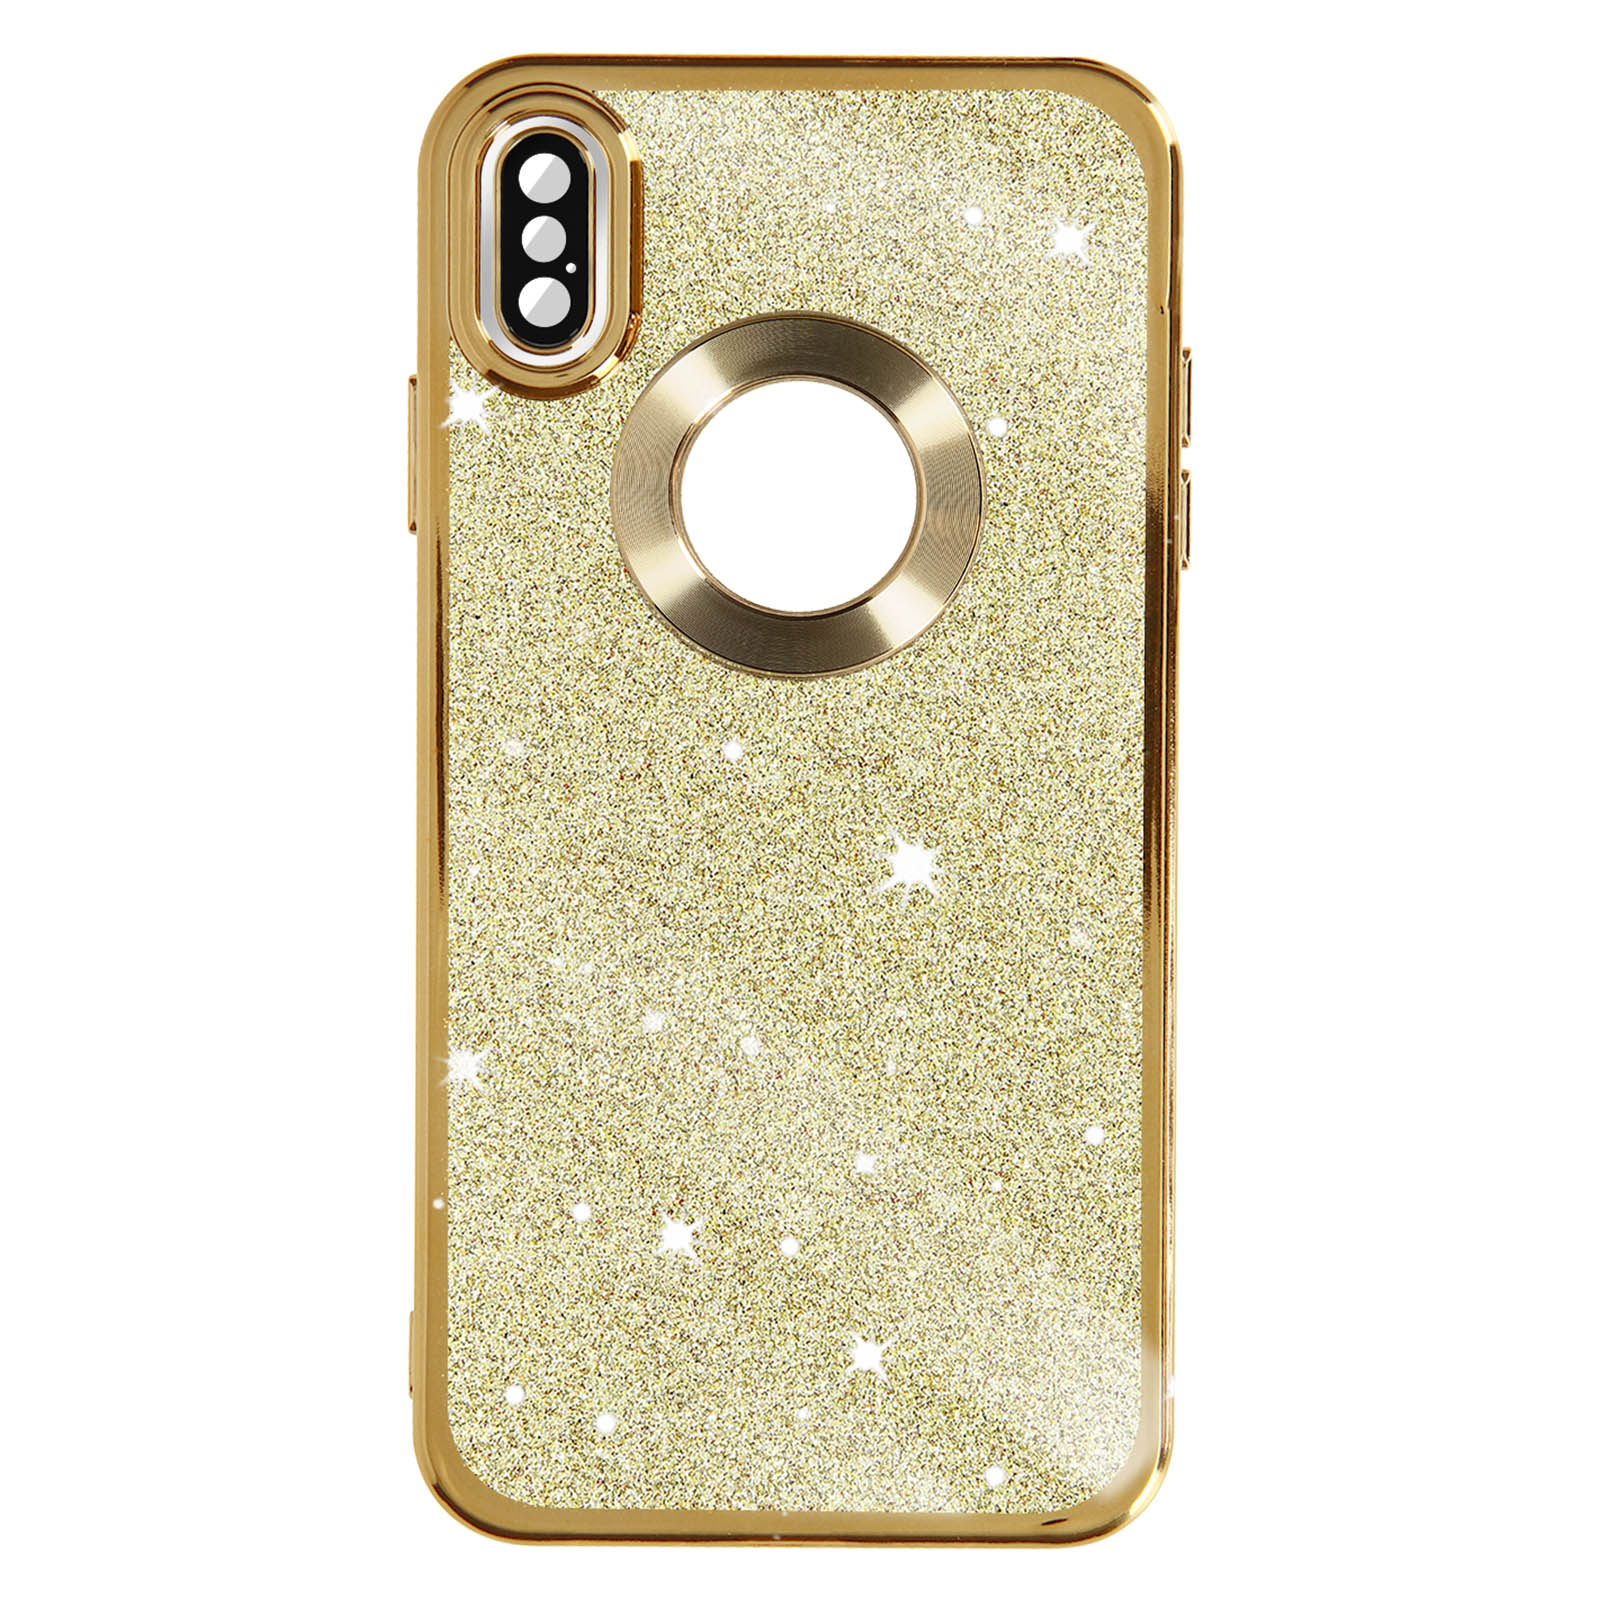 AVIZAR Protecam Spark iPhone Series, XS Backcover, Gold Apple, Max